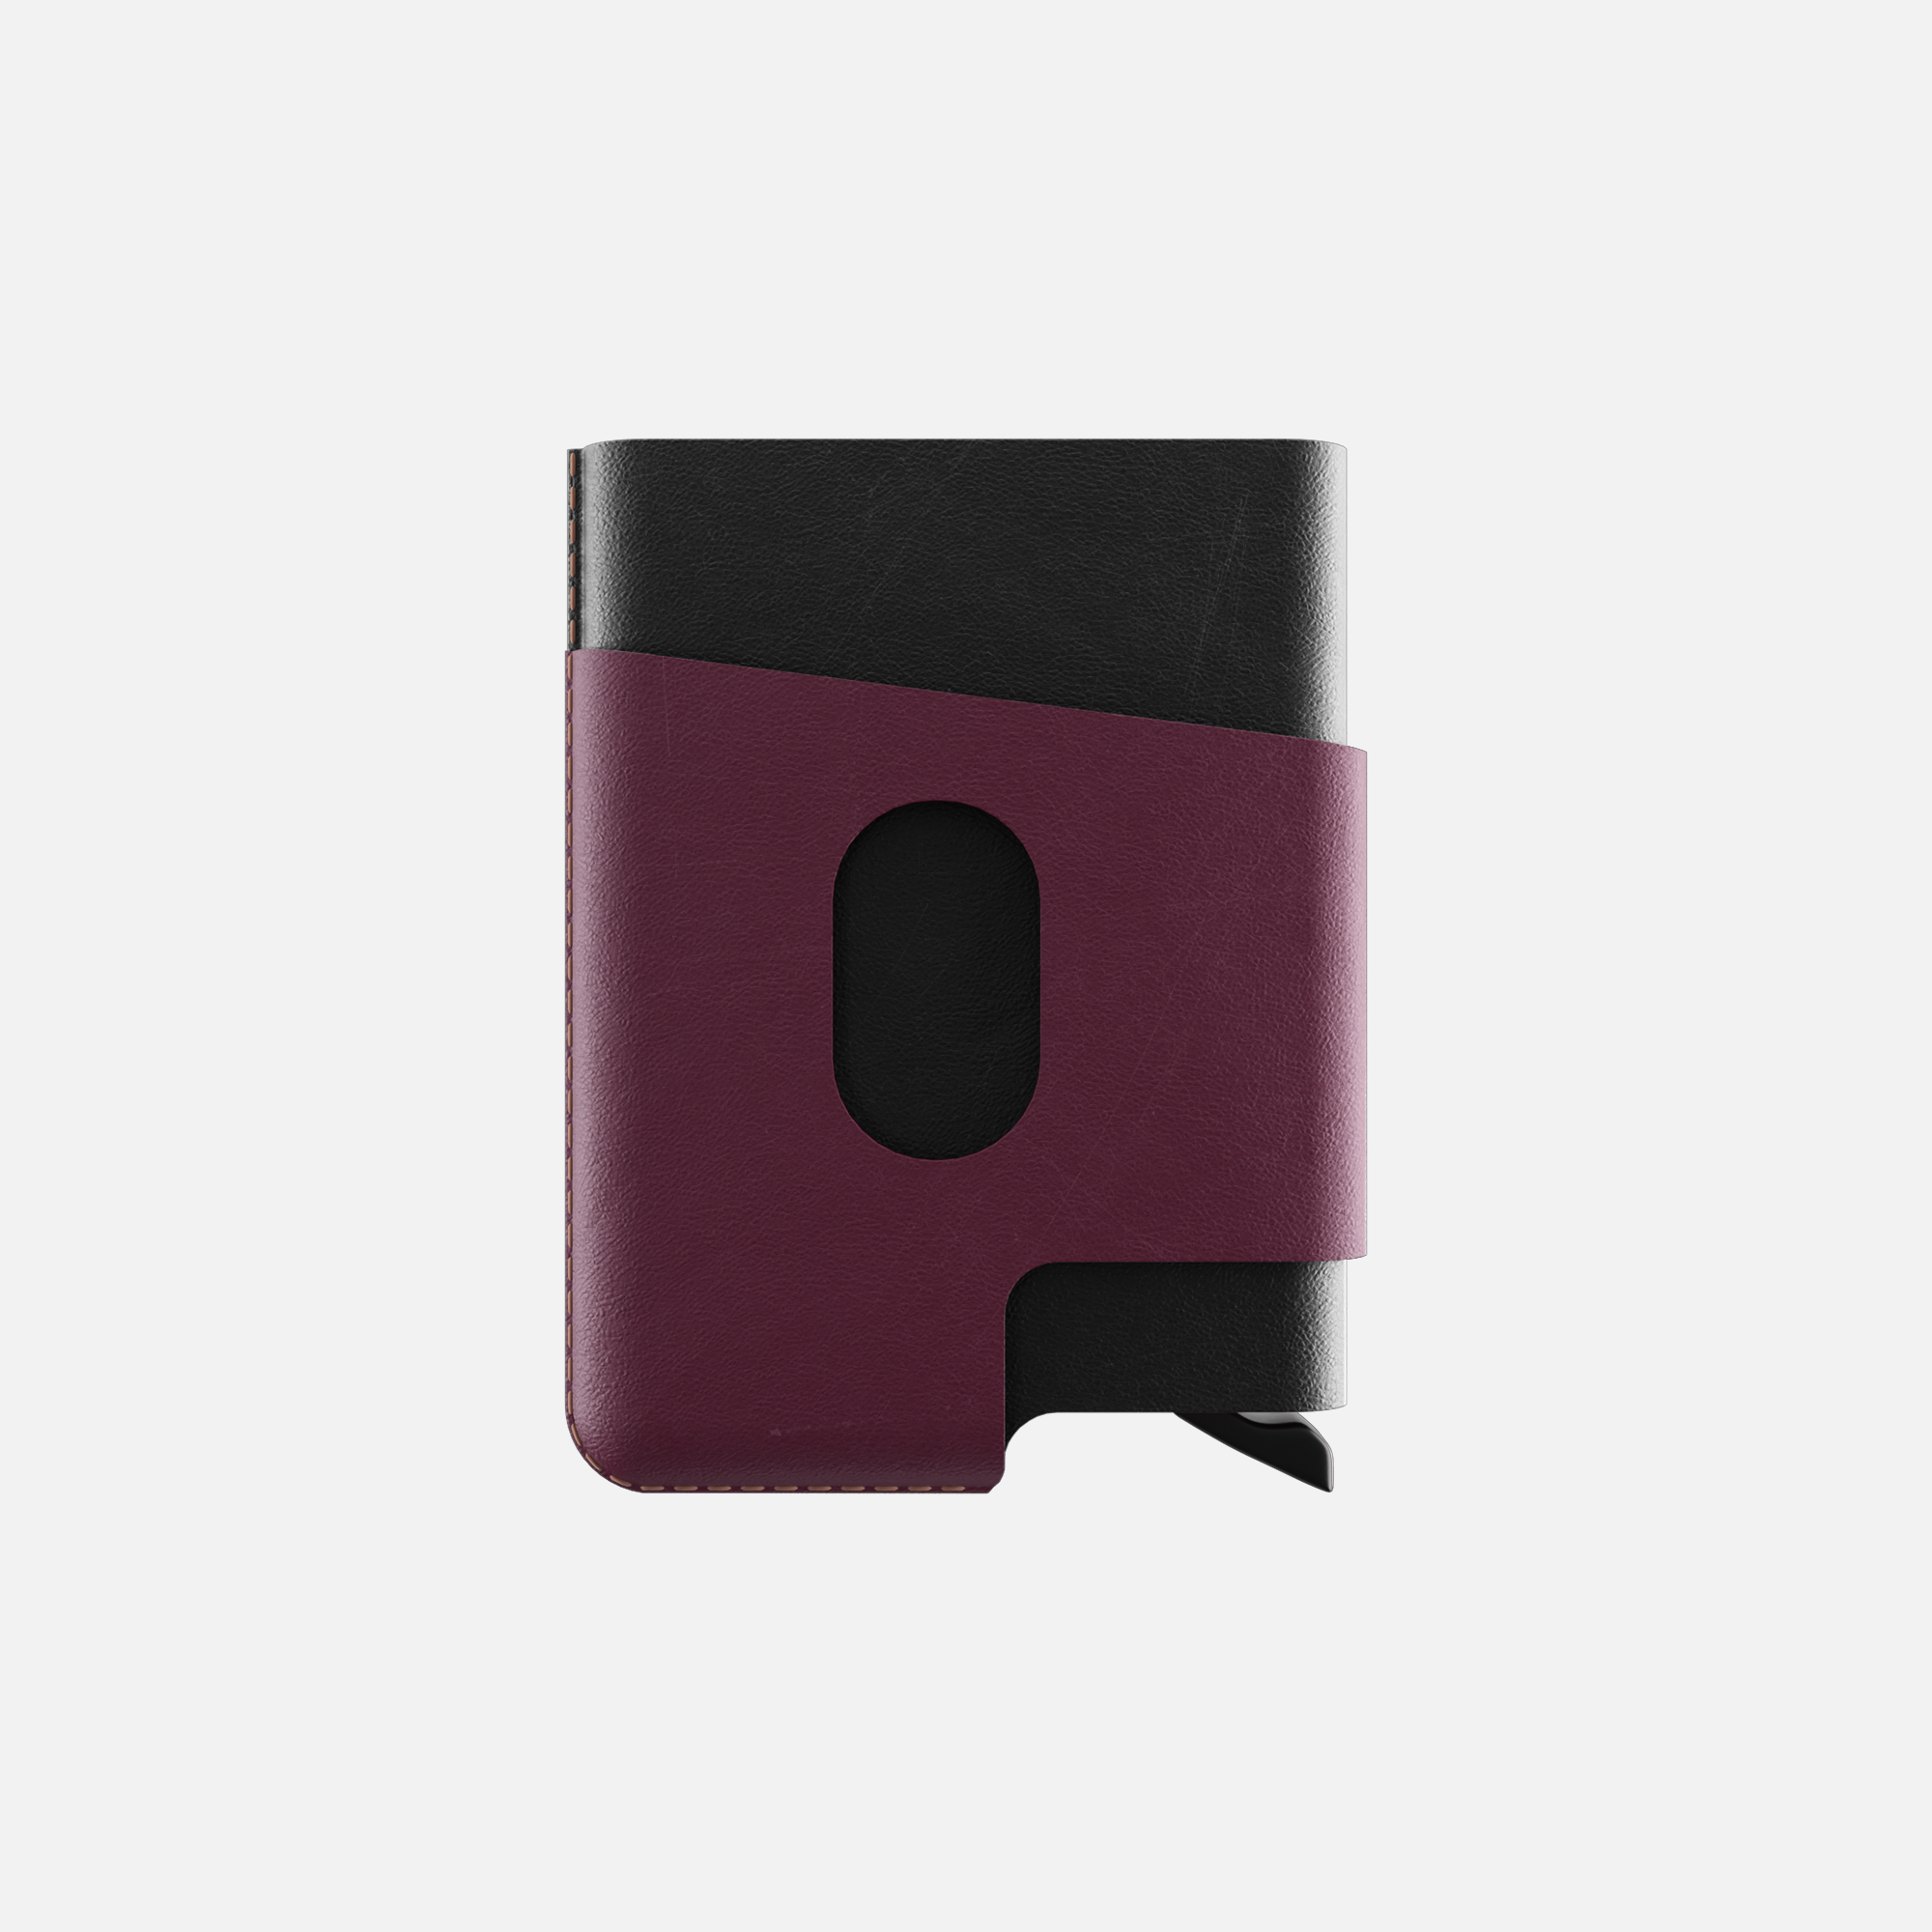 CUT-OUT Cardholder - RFID Block Featured - Handmade Natural Genuine Leather - Black/Burgundy